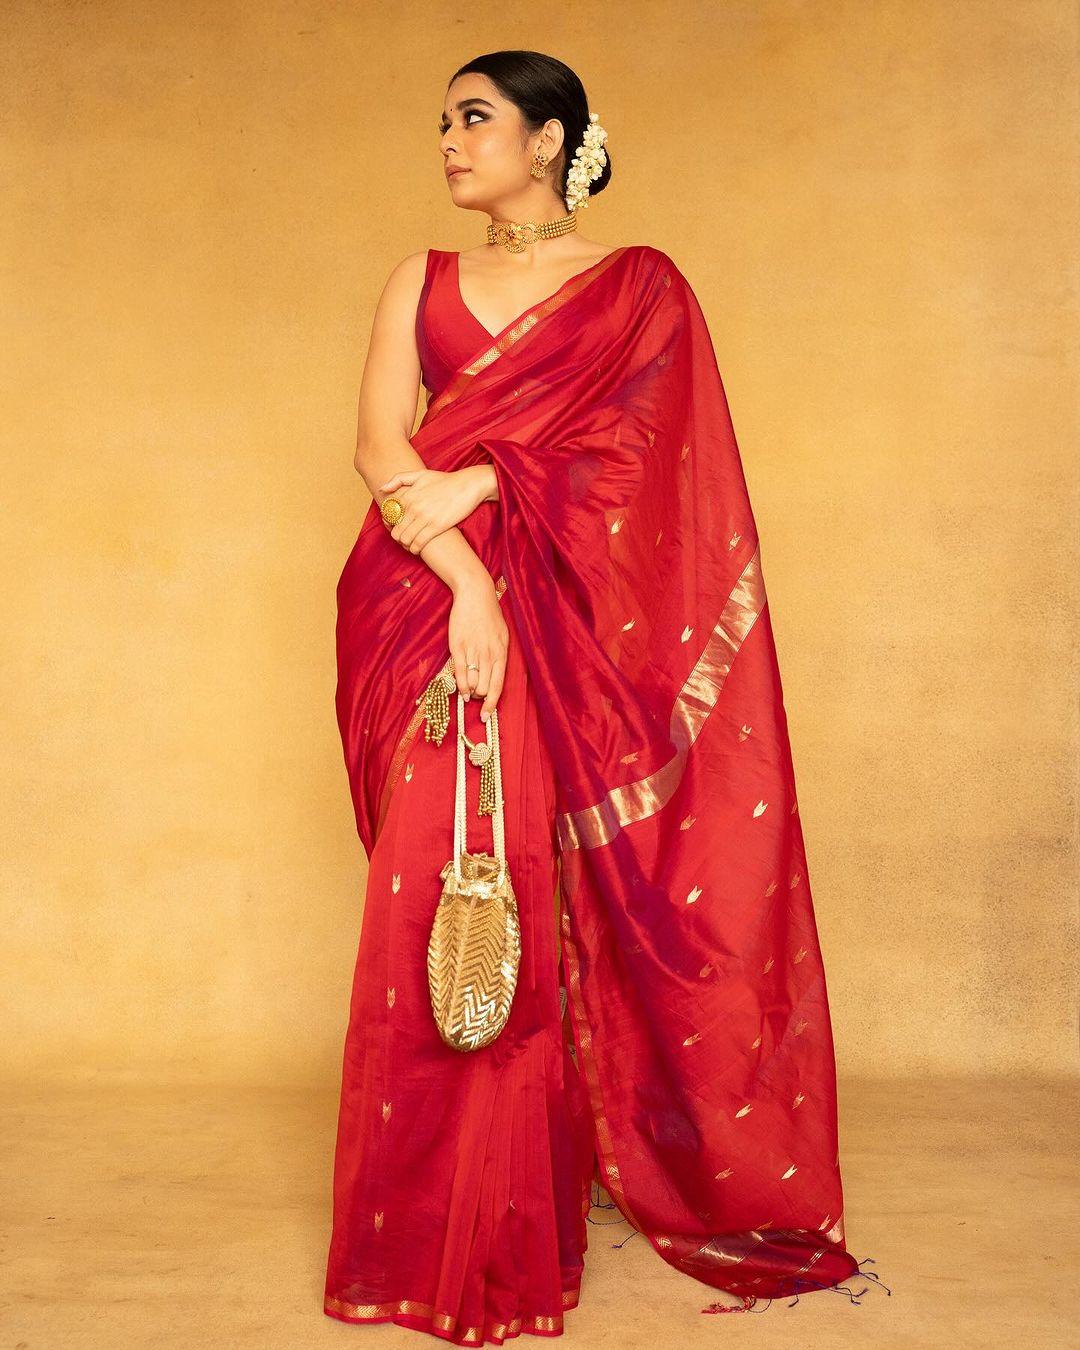 Mithila's red saree is a must-have for any wedding look.  The actress effortlessly balances boldness and elegance in this ensemble